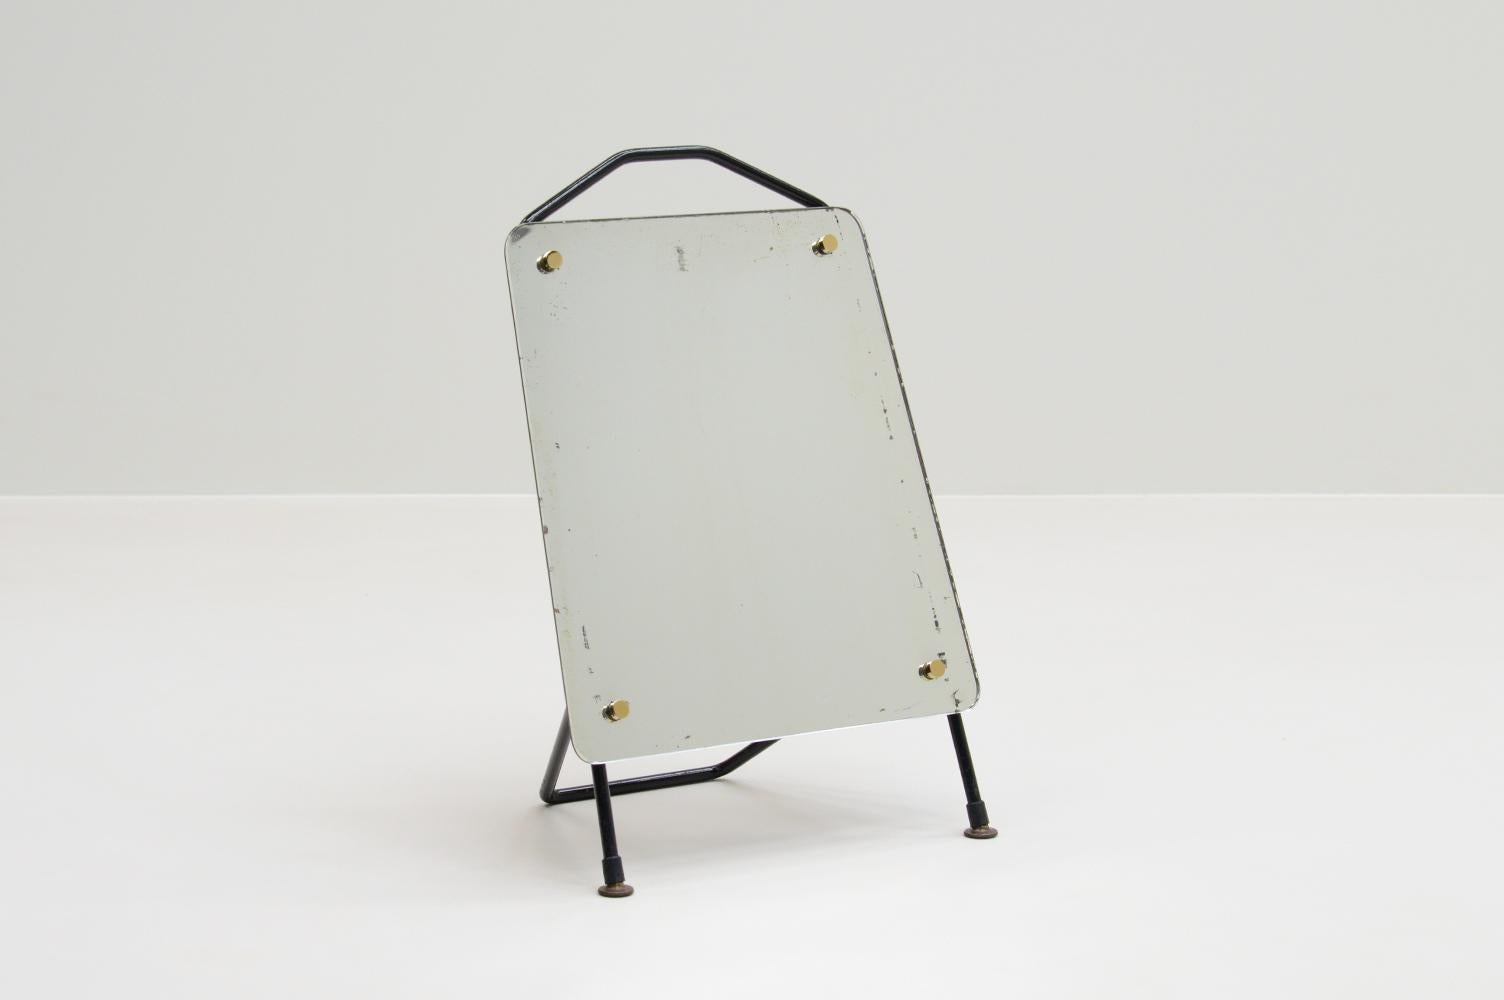 Table or shoe mirror, France 1960s. Black metal frame, tapered shape mirror and brass details. Because of the angle it can be used as a table or shoe mirror. The mirror has a nice patina. In good vintage condition. 

